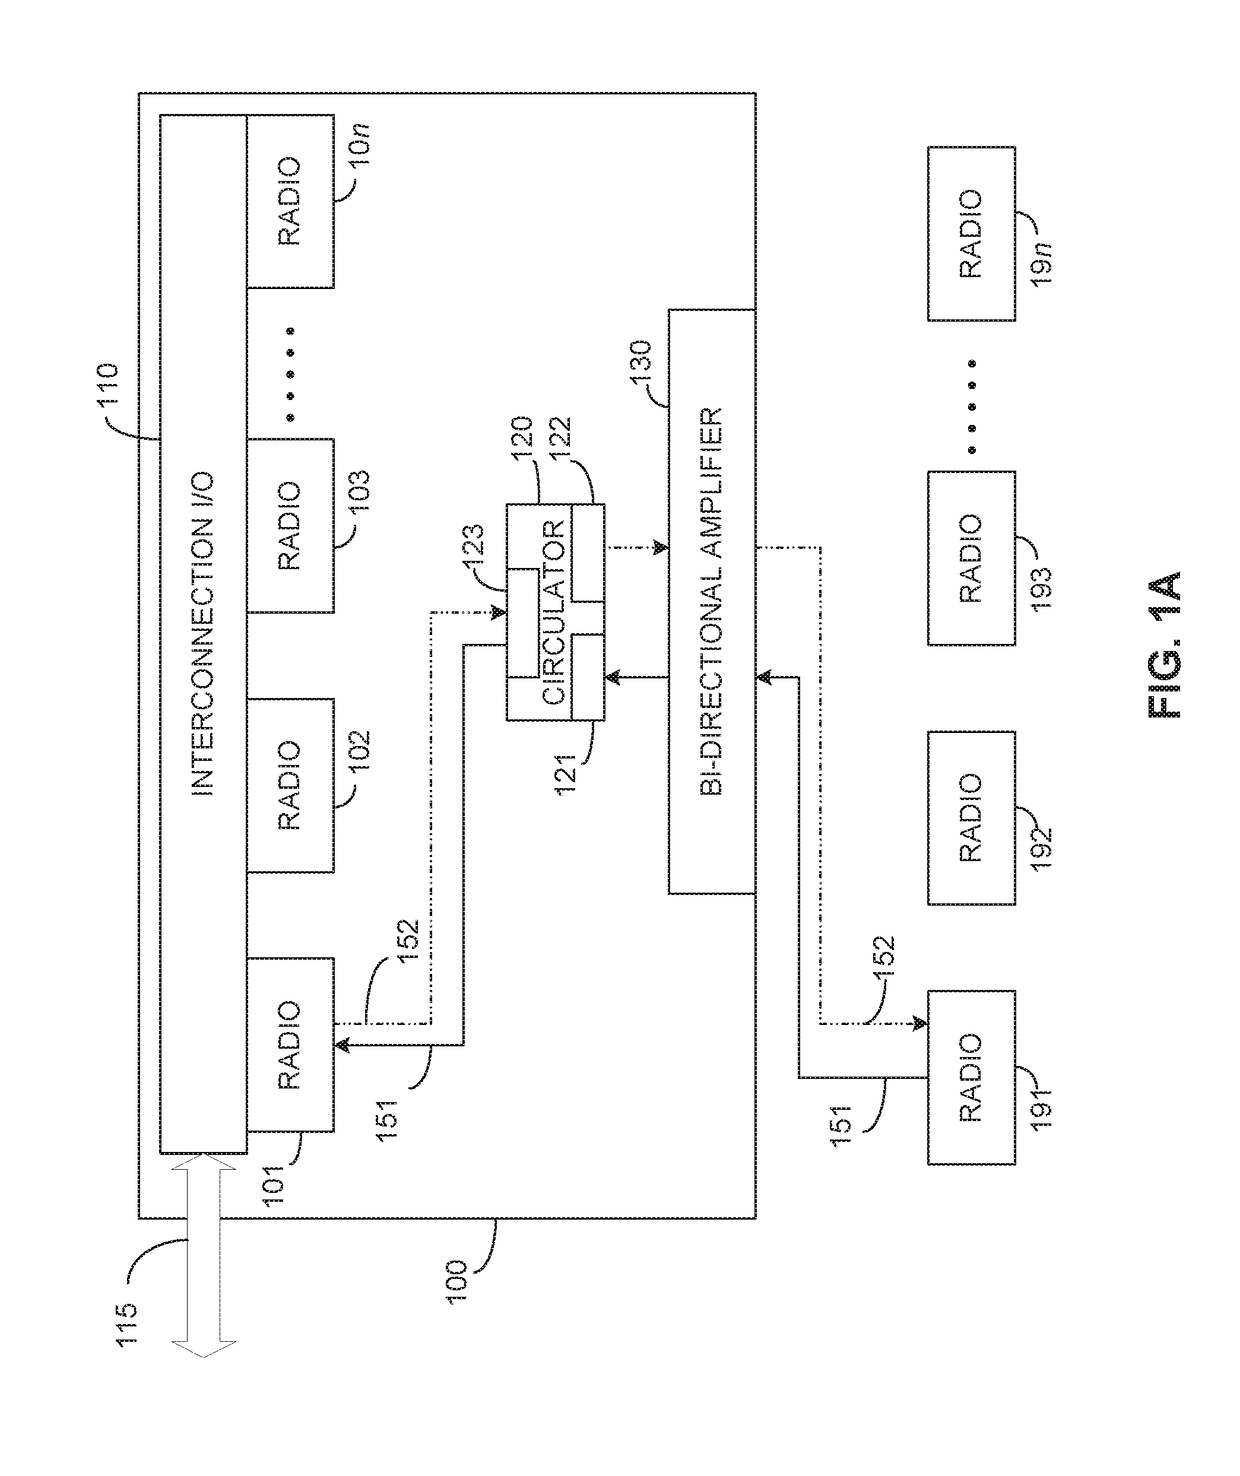 System for operating multiple transceiver modules concurrently